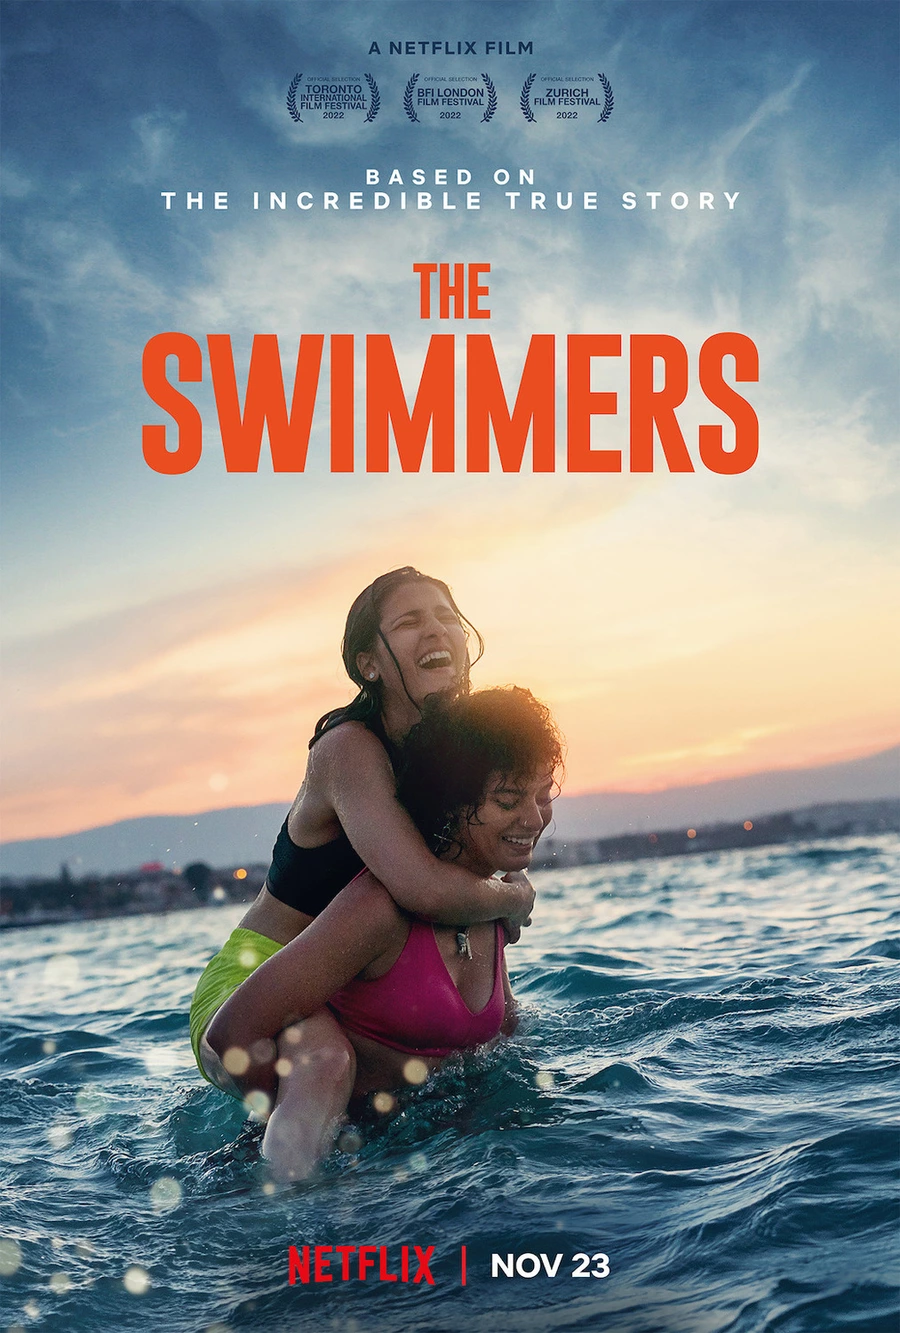 On November 23, Netflix released «The Swimmers», a drama about the incredible and challenging journey of two swimmer sisters that begins in war-torn Syria and ends at the Rio 2016 Olympic Games